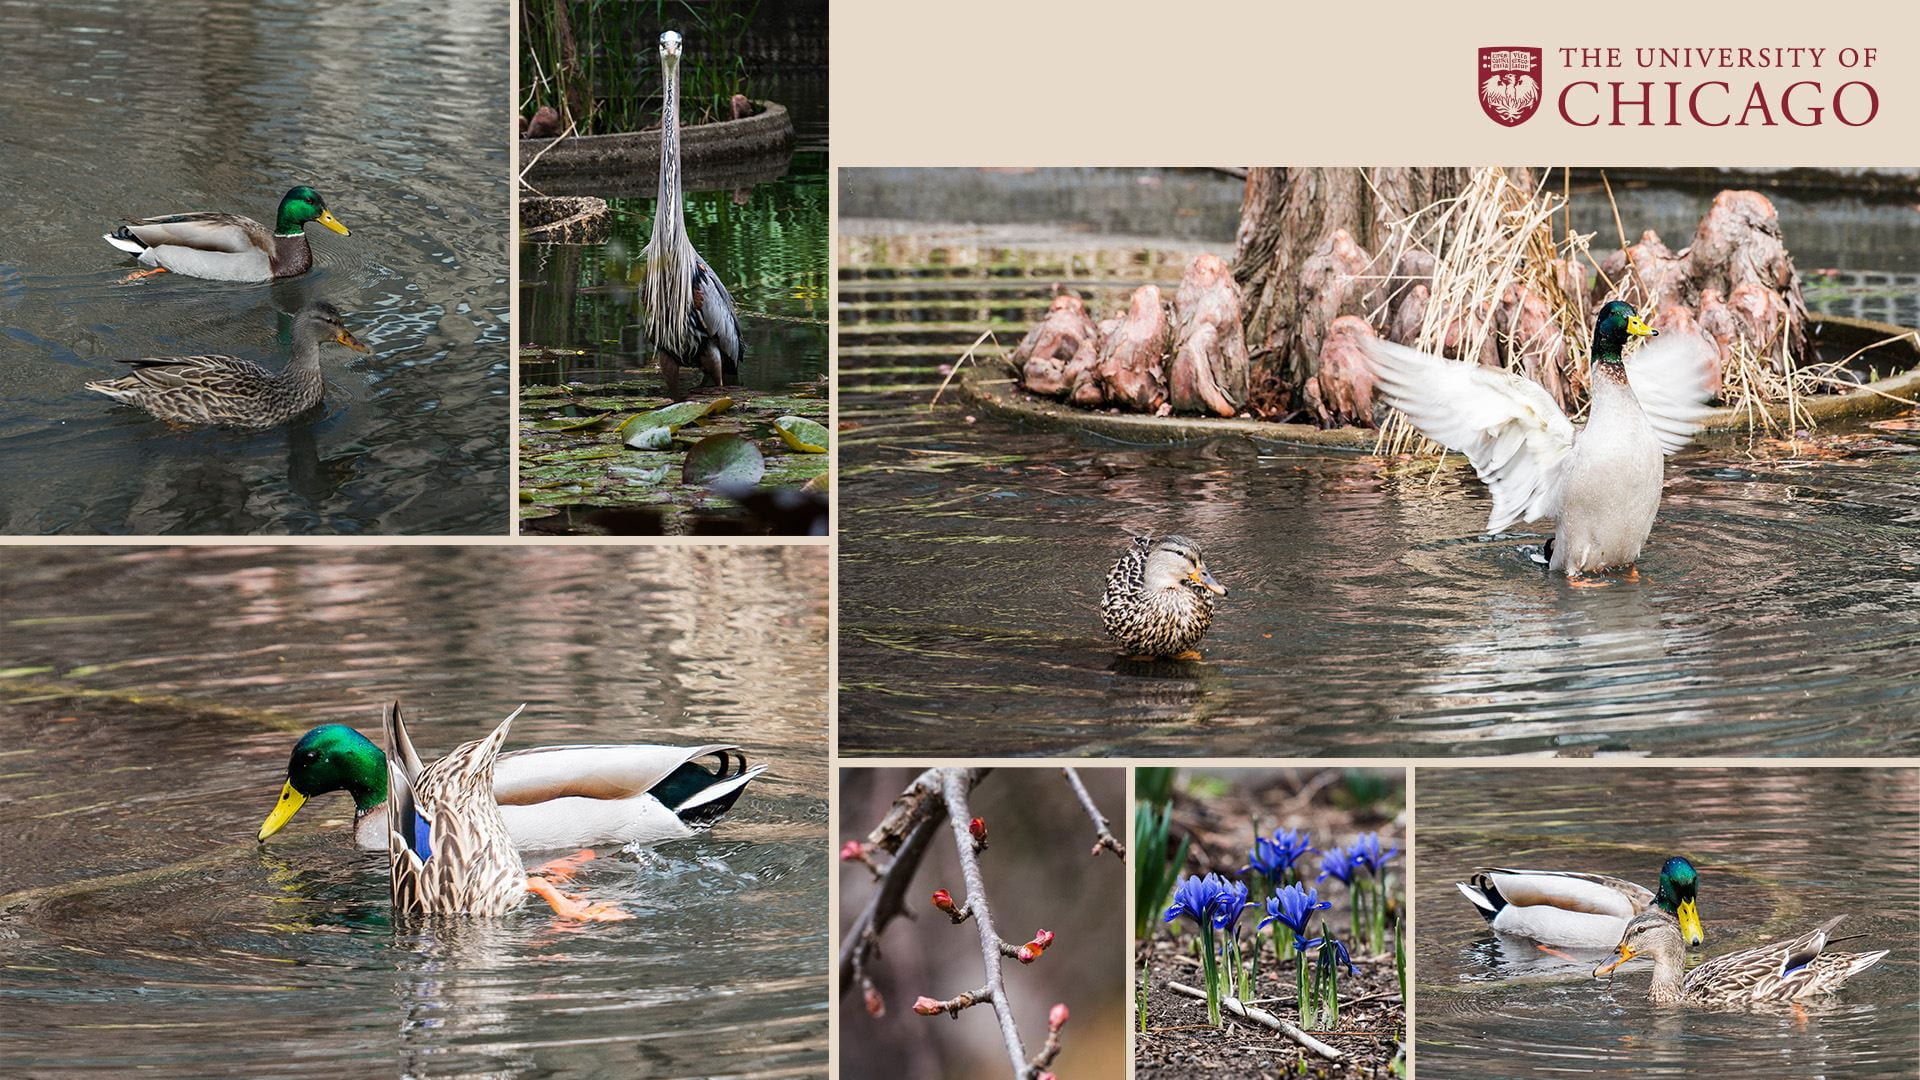 Collage of ducks, other birds, and flowers by the pond